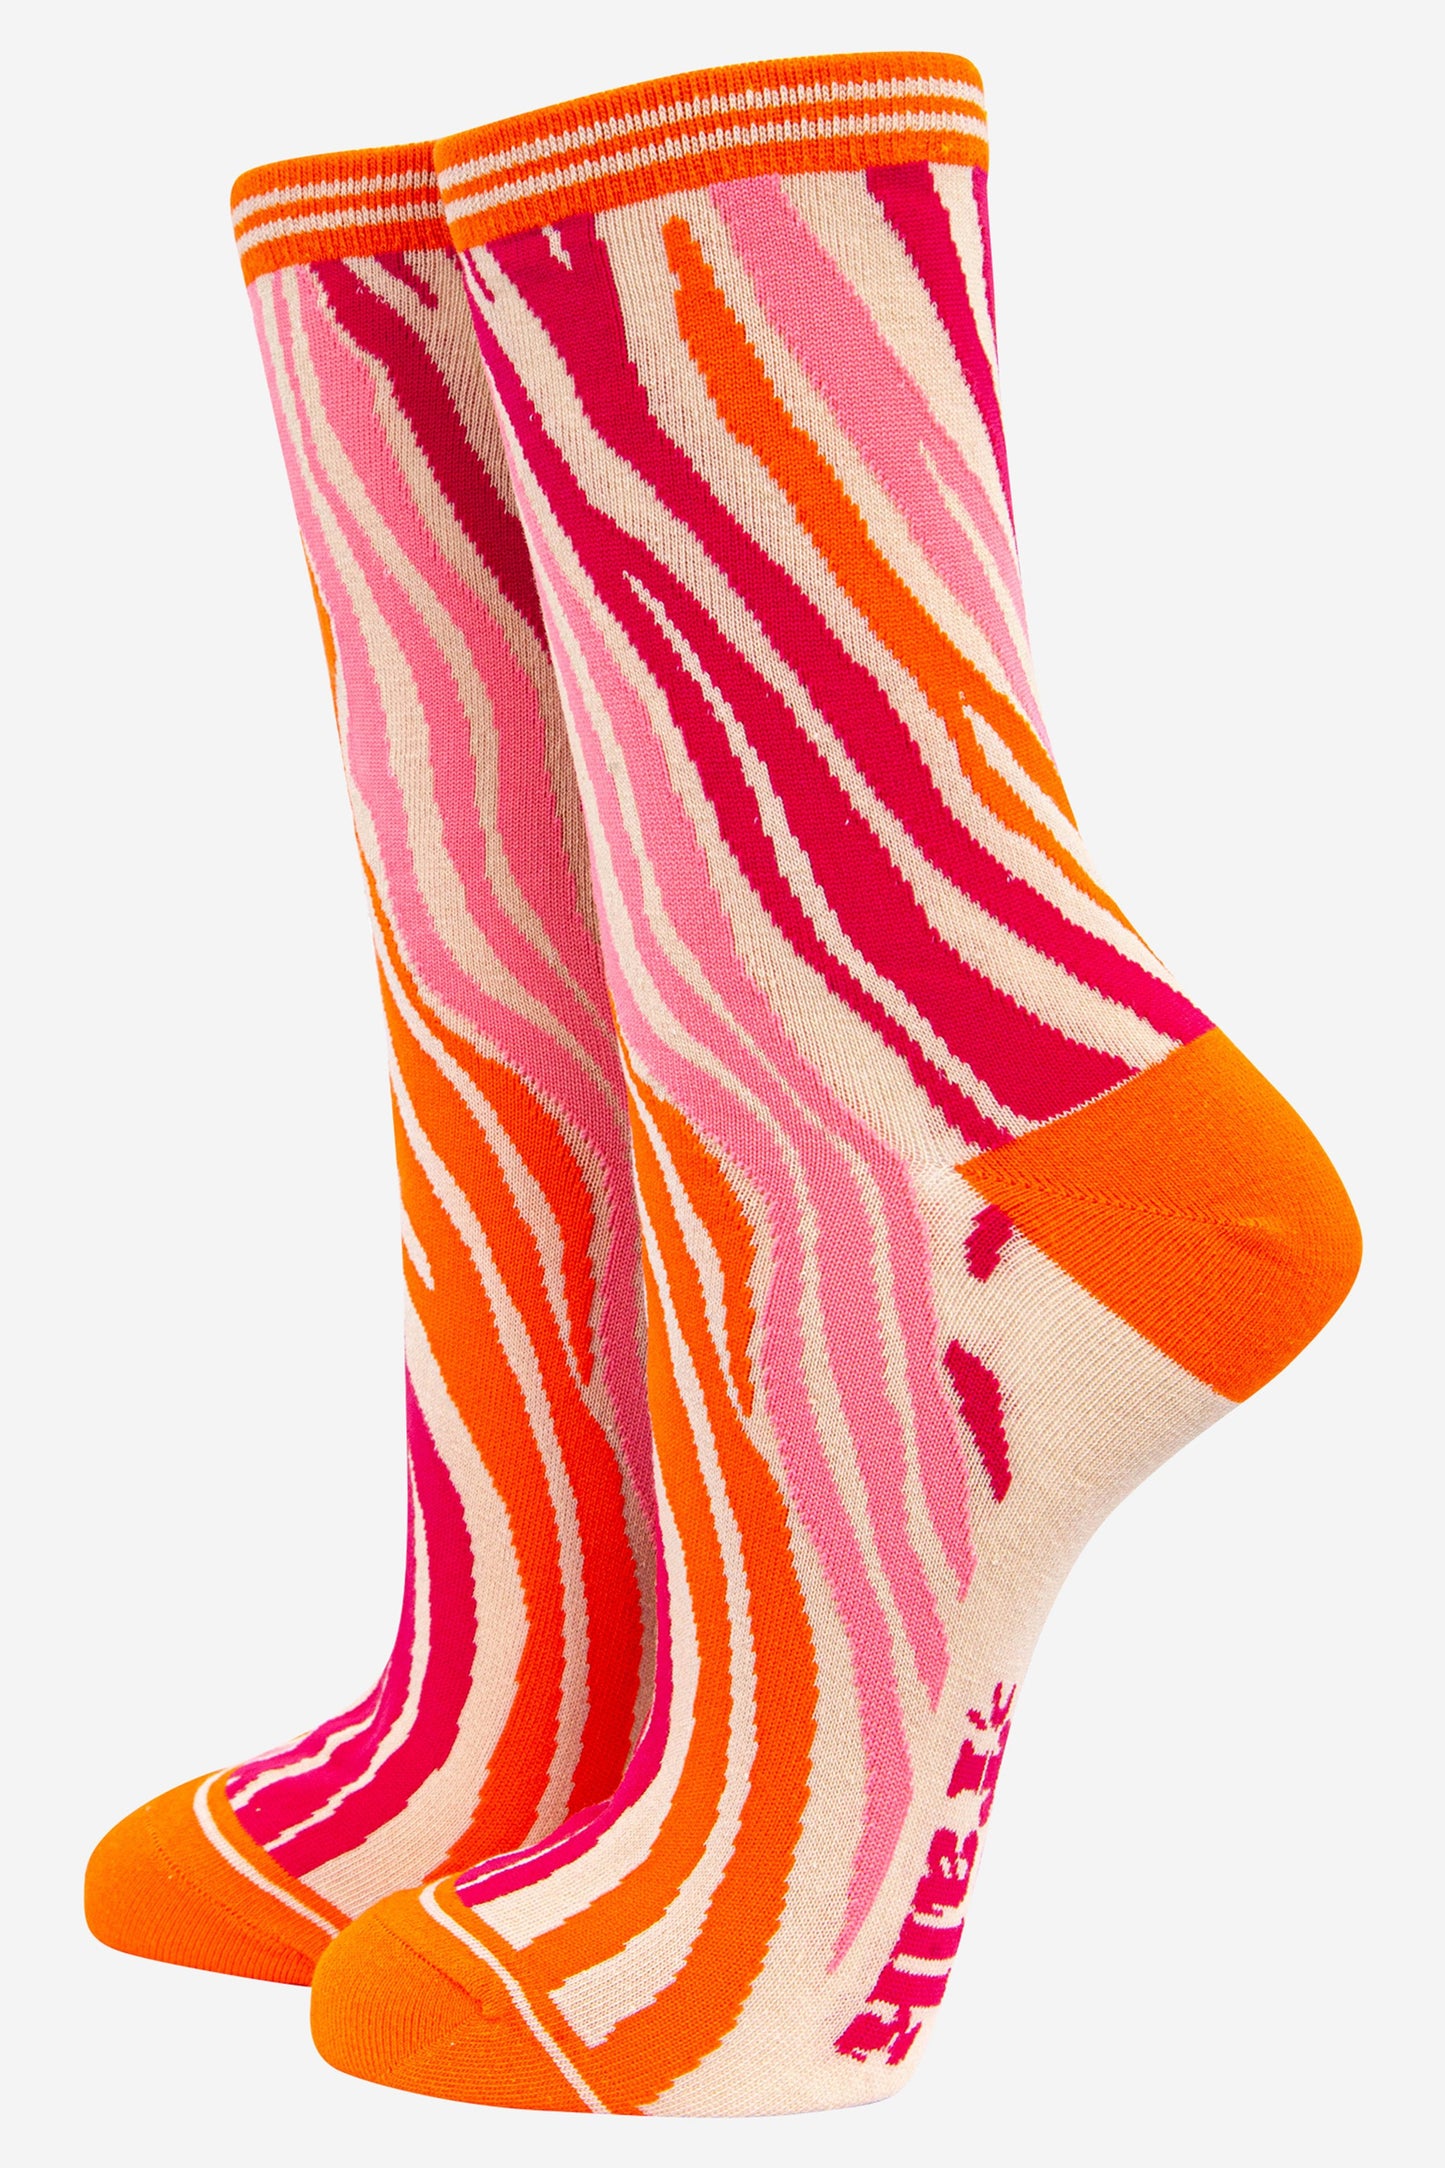 bamboo ankle socks with an all over zebra print pattern in orange and pink